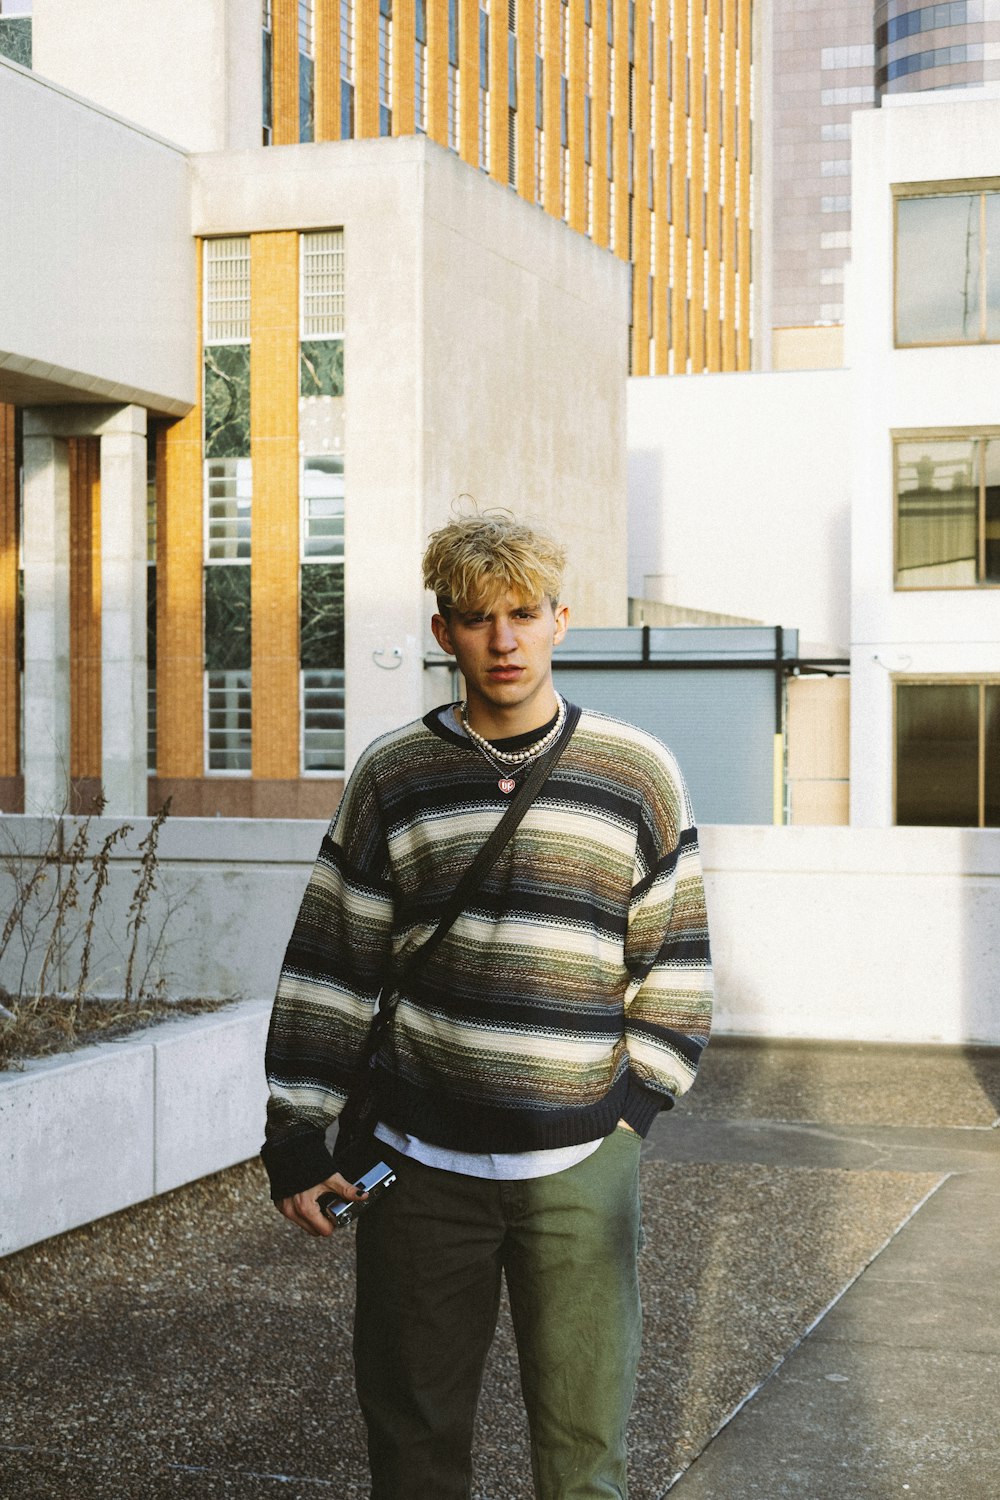 man in black and white striped sweater standing near white concrete building during daytime